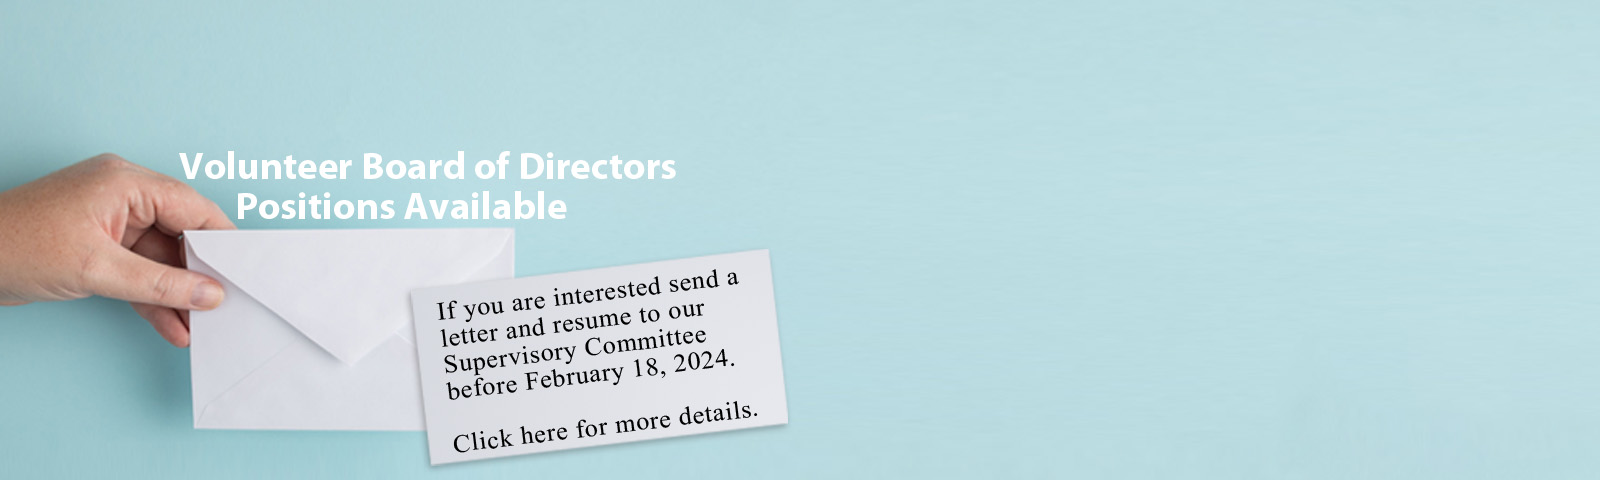 Volunteer board of directors positions available. If you are interested send a letter and resume to our Supervisory Committee before February 18, 2024. Click here for more details.